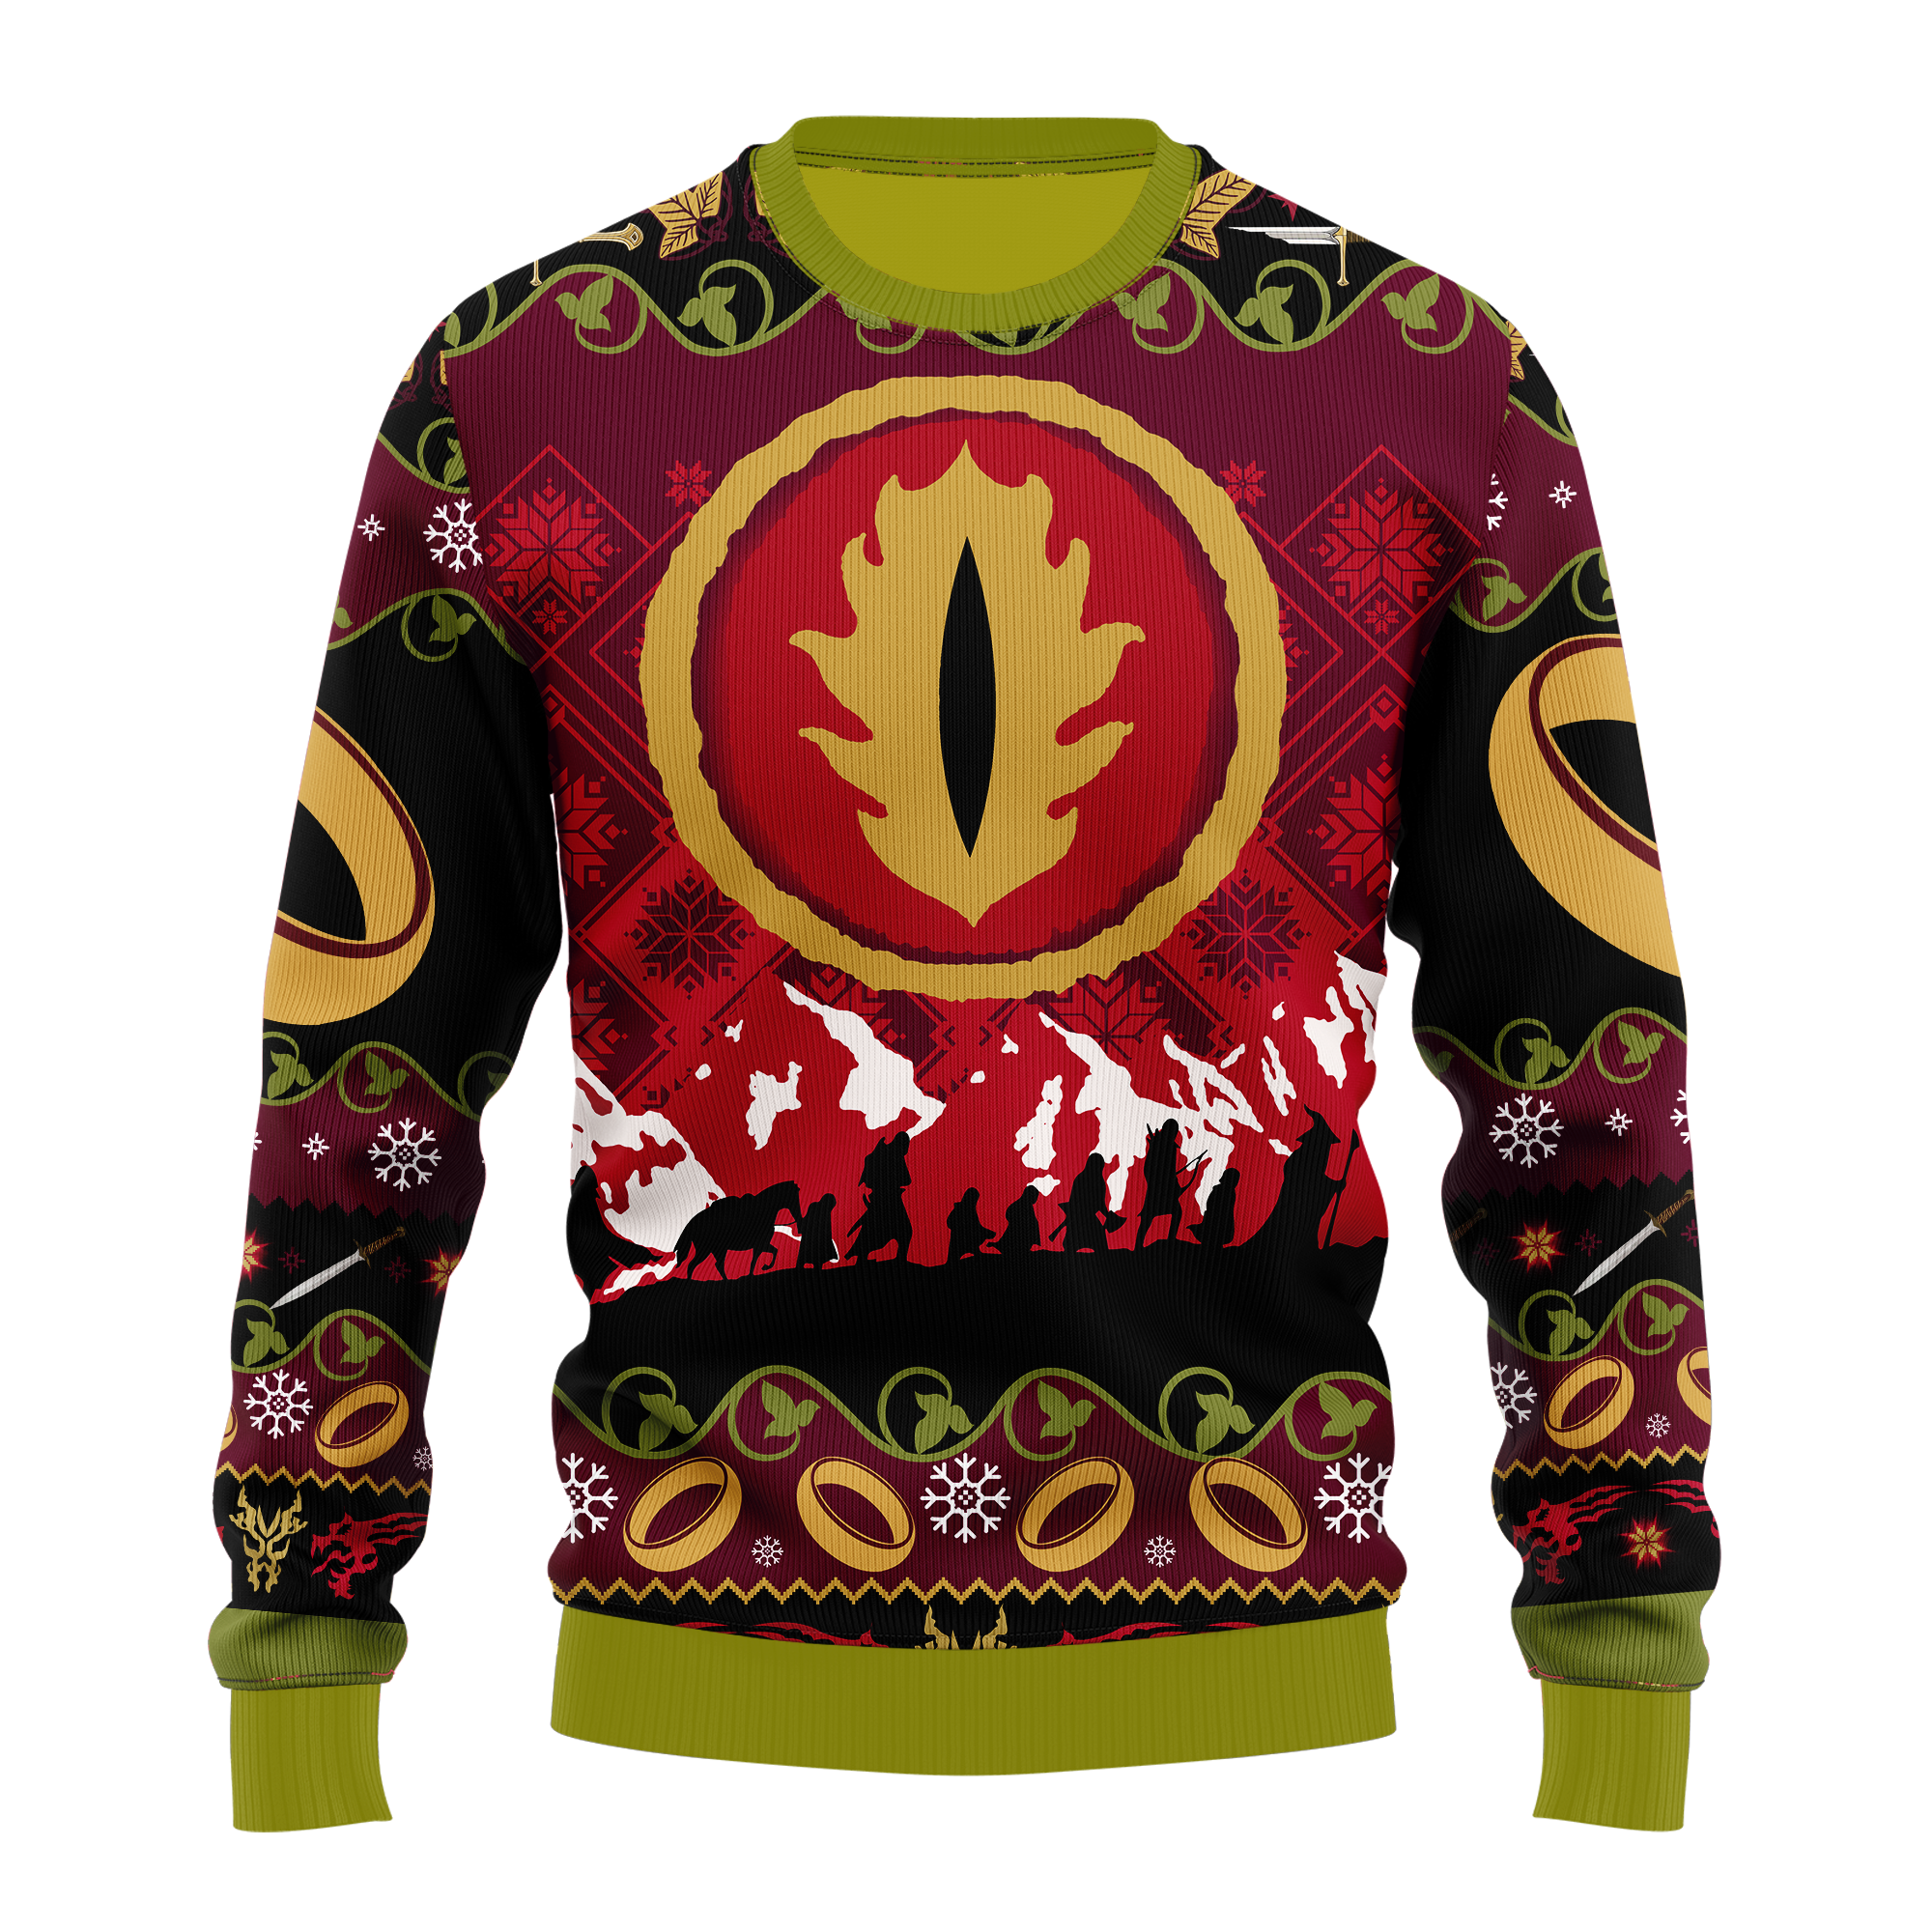 Sauron The Lord Of The Rings Ugly Christmas Sweater Xmas Gift